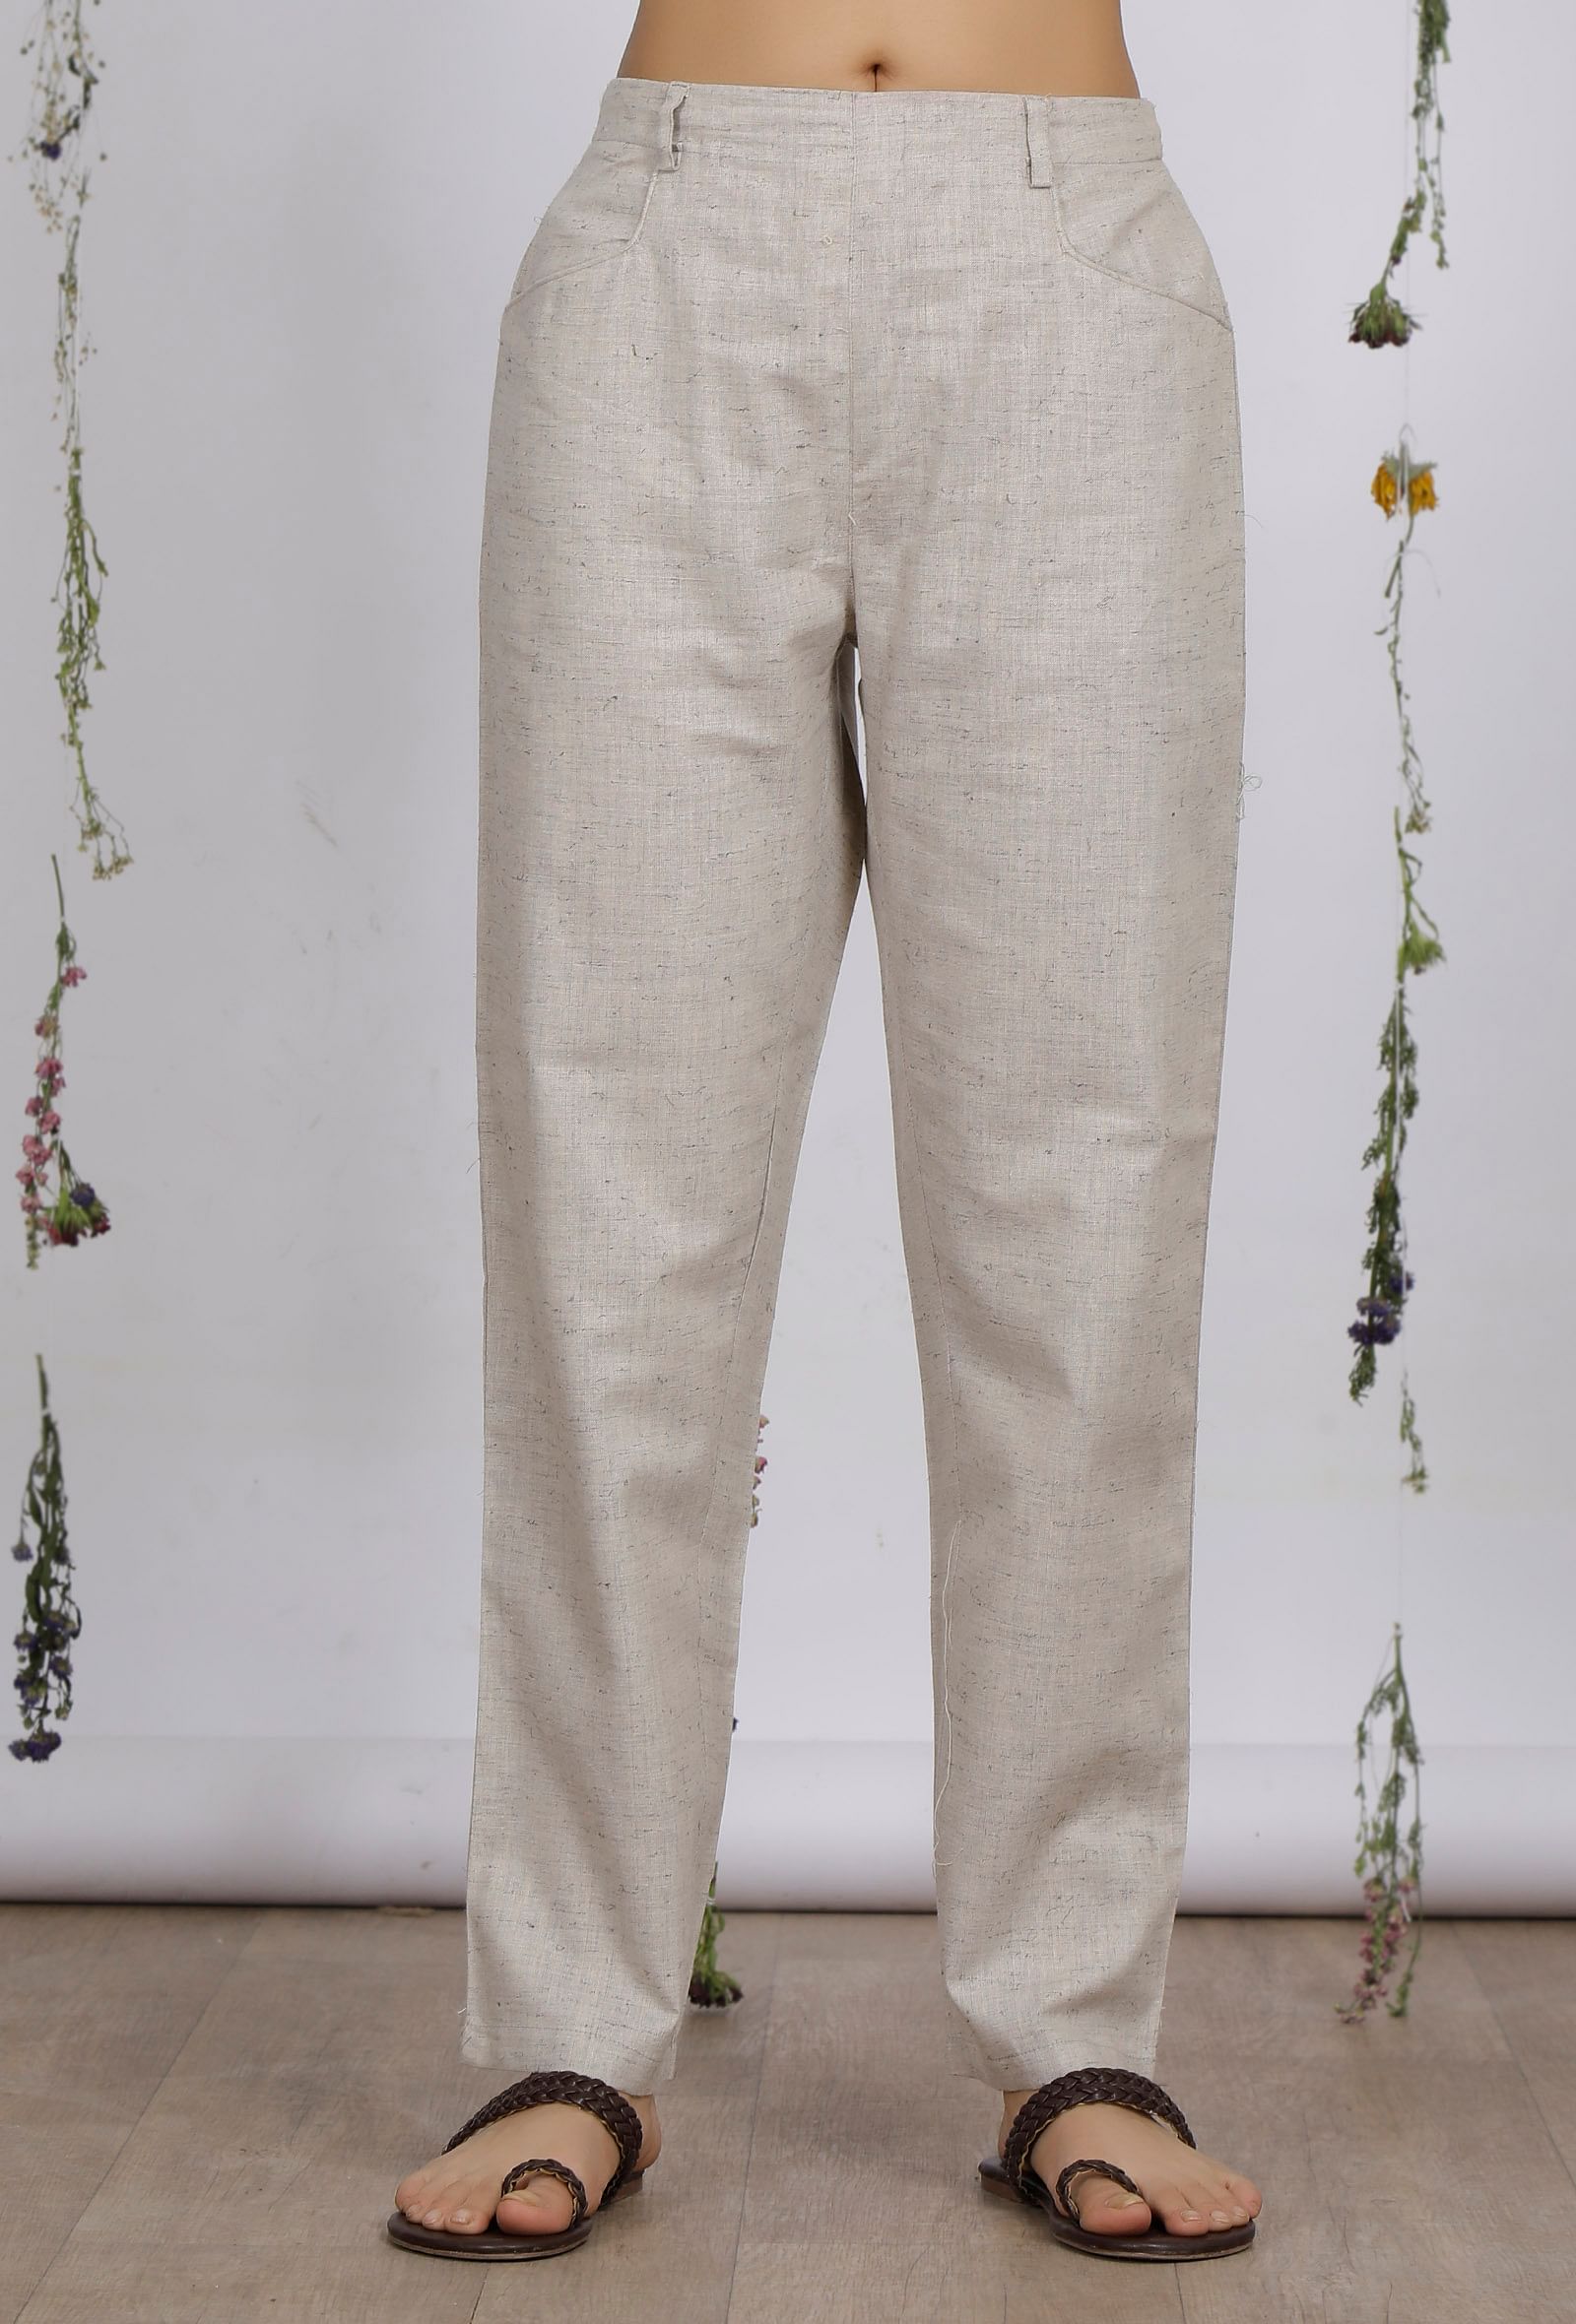 Cream Natural Cotton Wide Harem Trousers | Off-White | Split-Skirts-Pants,  Vacation, Fall, Bohemian, Junior